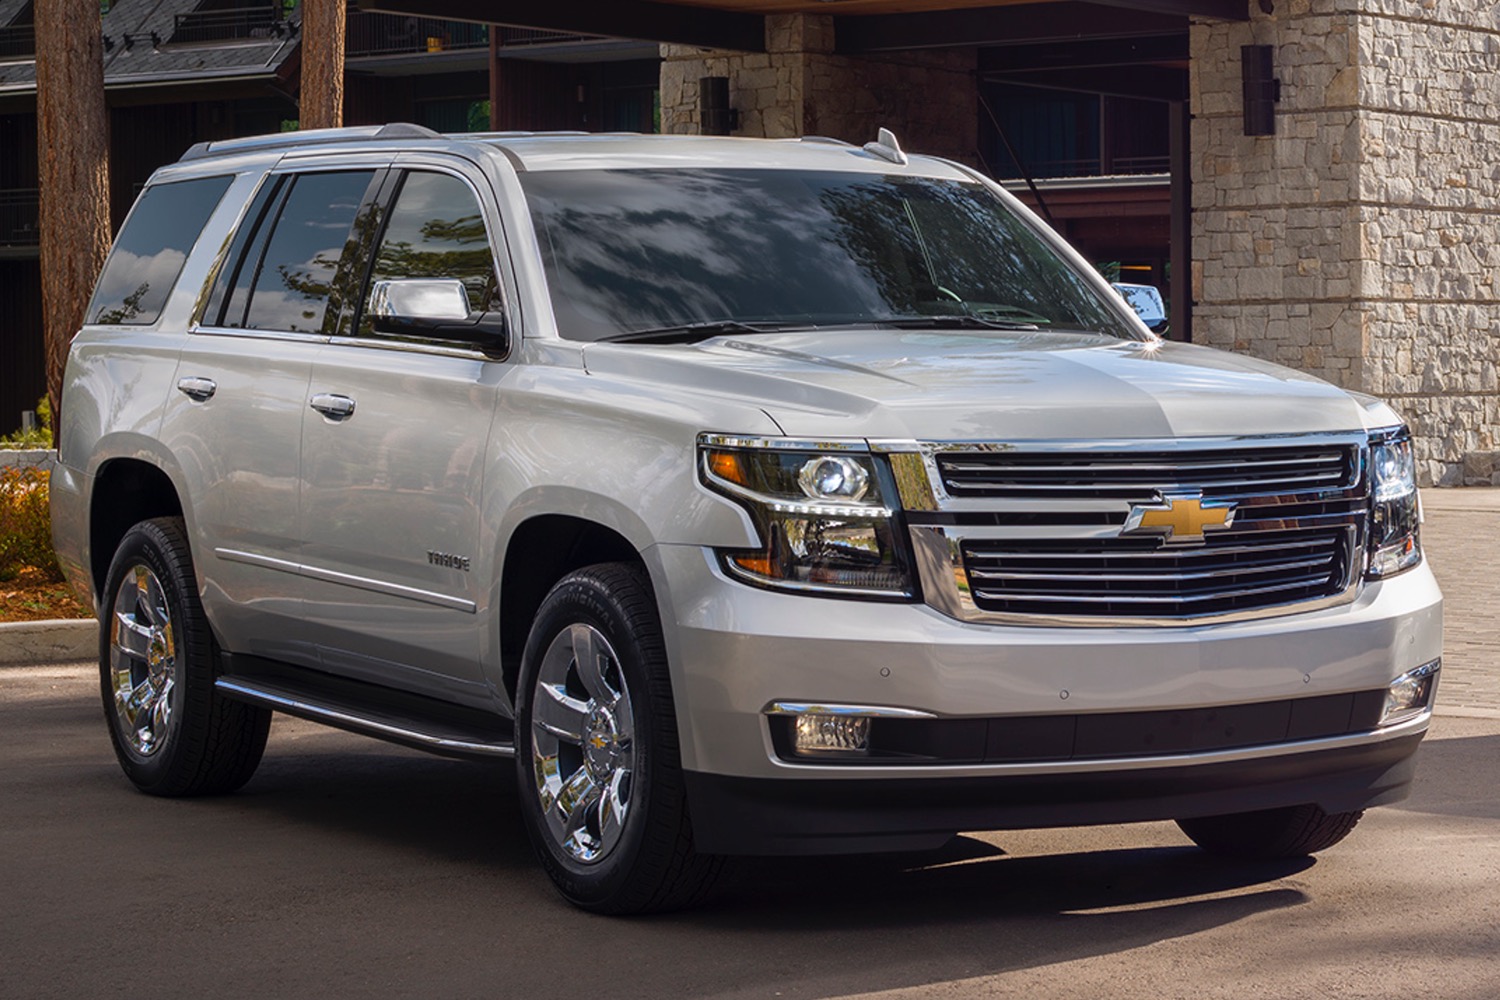 2019 Chevrolet Tahoe Price Sees 0 Increase From 2018 | GM Authority